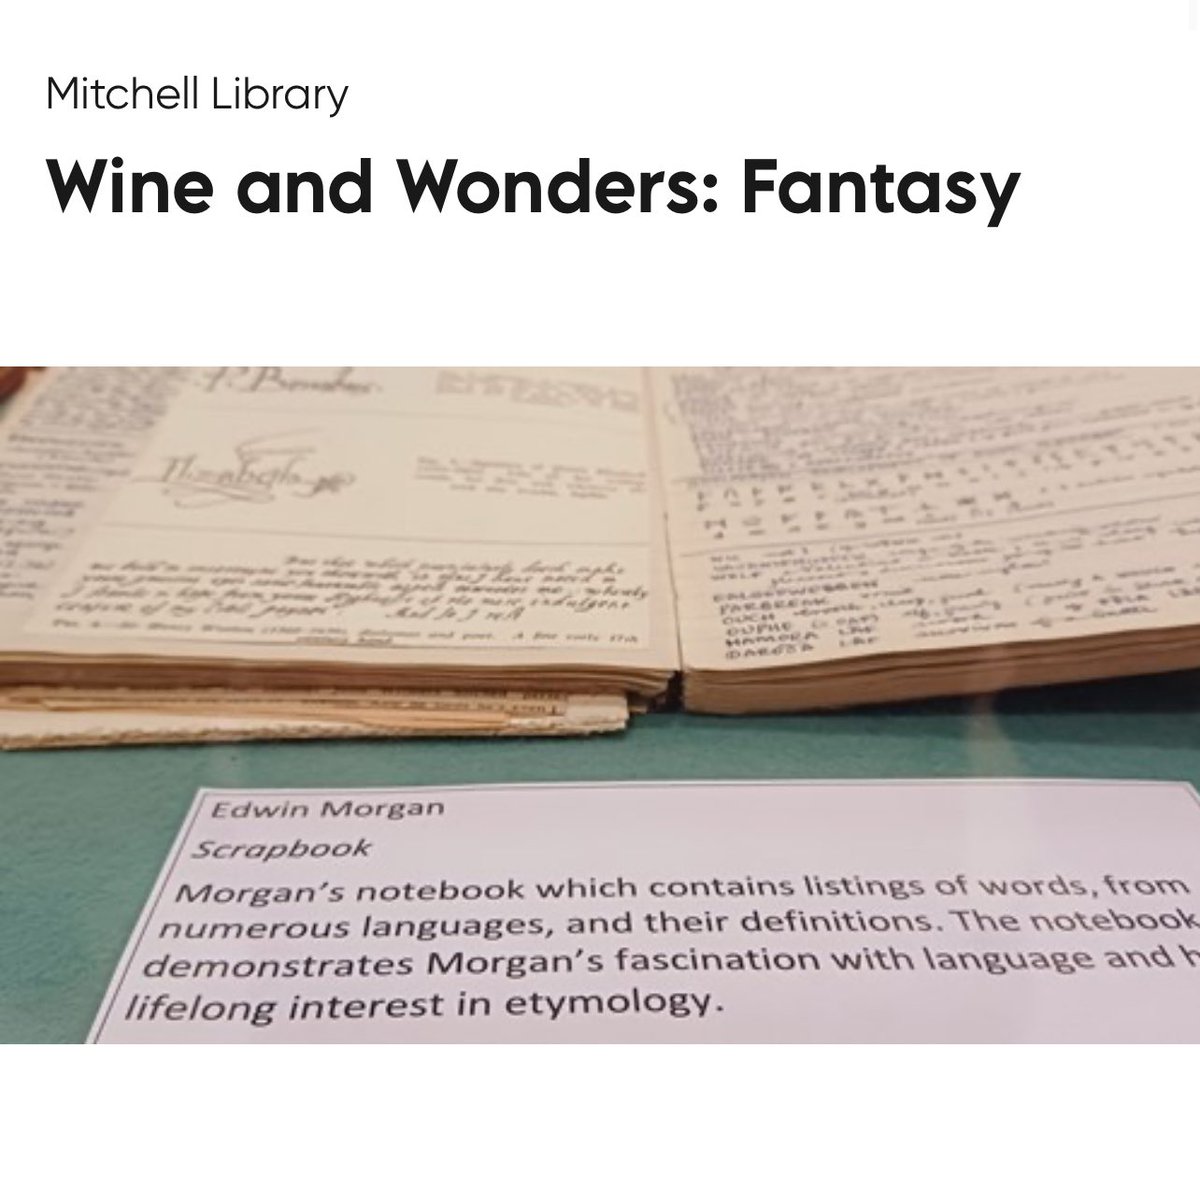 Members of @UofGFantasy will present on their research at this event on Friday: glasgowlife.org.uk/event/1/wine-a…
Speakers include @Dr_Dimitra_Fimi @RealTomEmanuel @excaliburedpan @LucyHoldsworth @MrWillSherwood @GeorginaGale_ @AliceLangley90 @ohlookdragons + @WillTattersdill 
@GlasgowLib